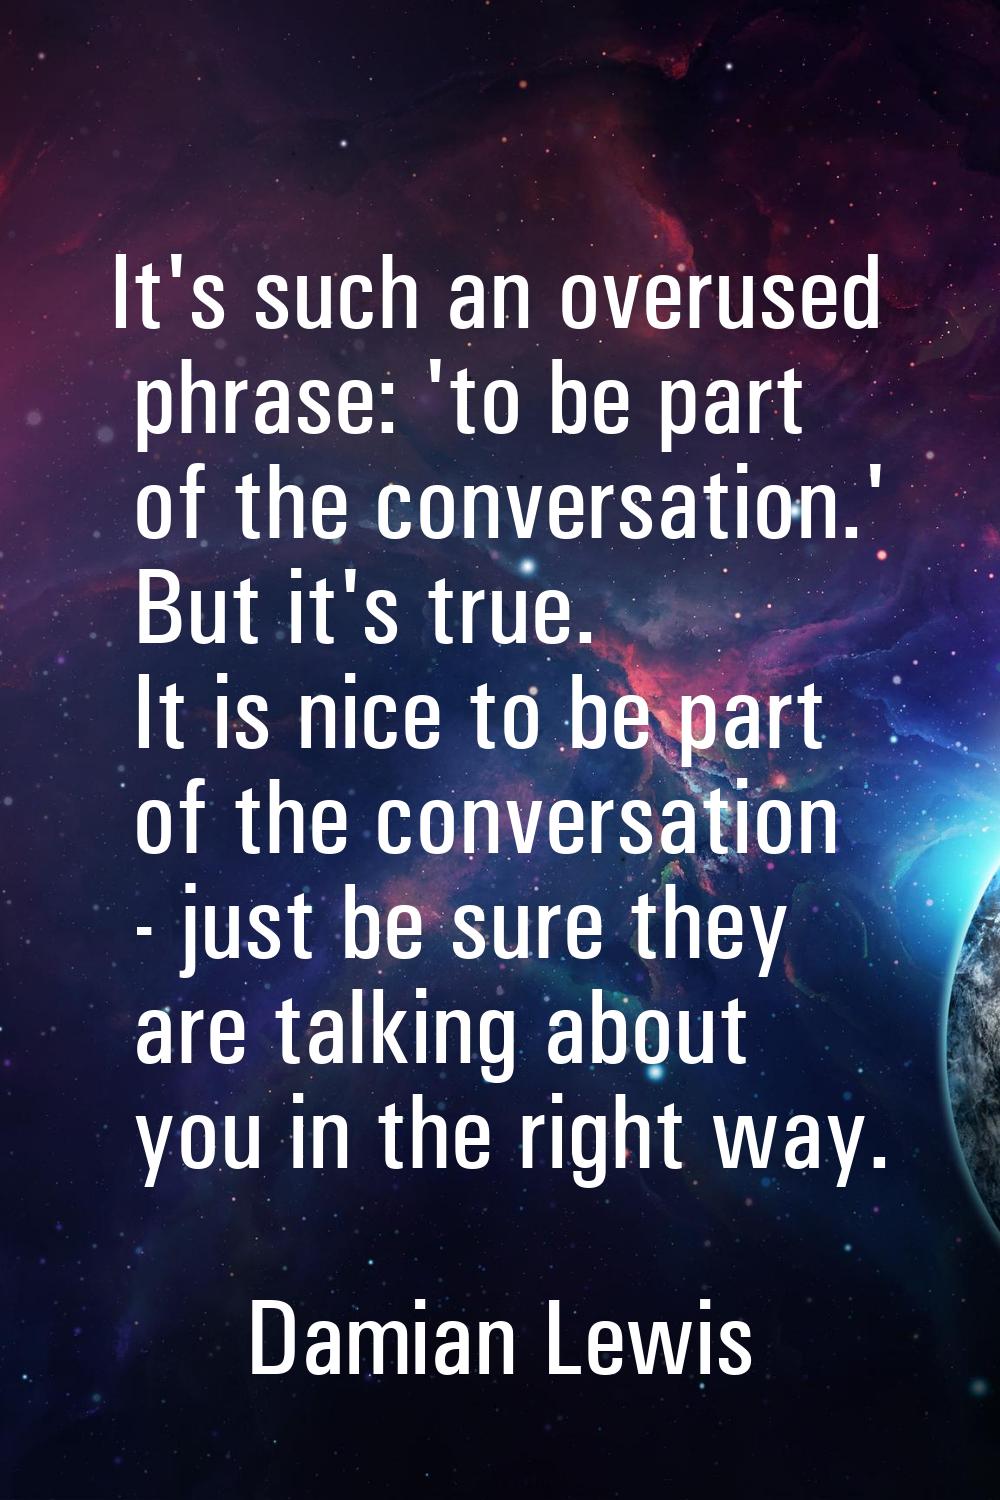 It's such an overused phrase: 'to be part of the conversation.' But it's true. It is nice to be par